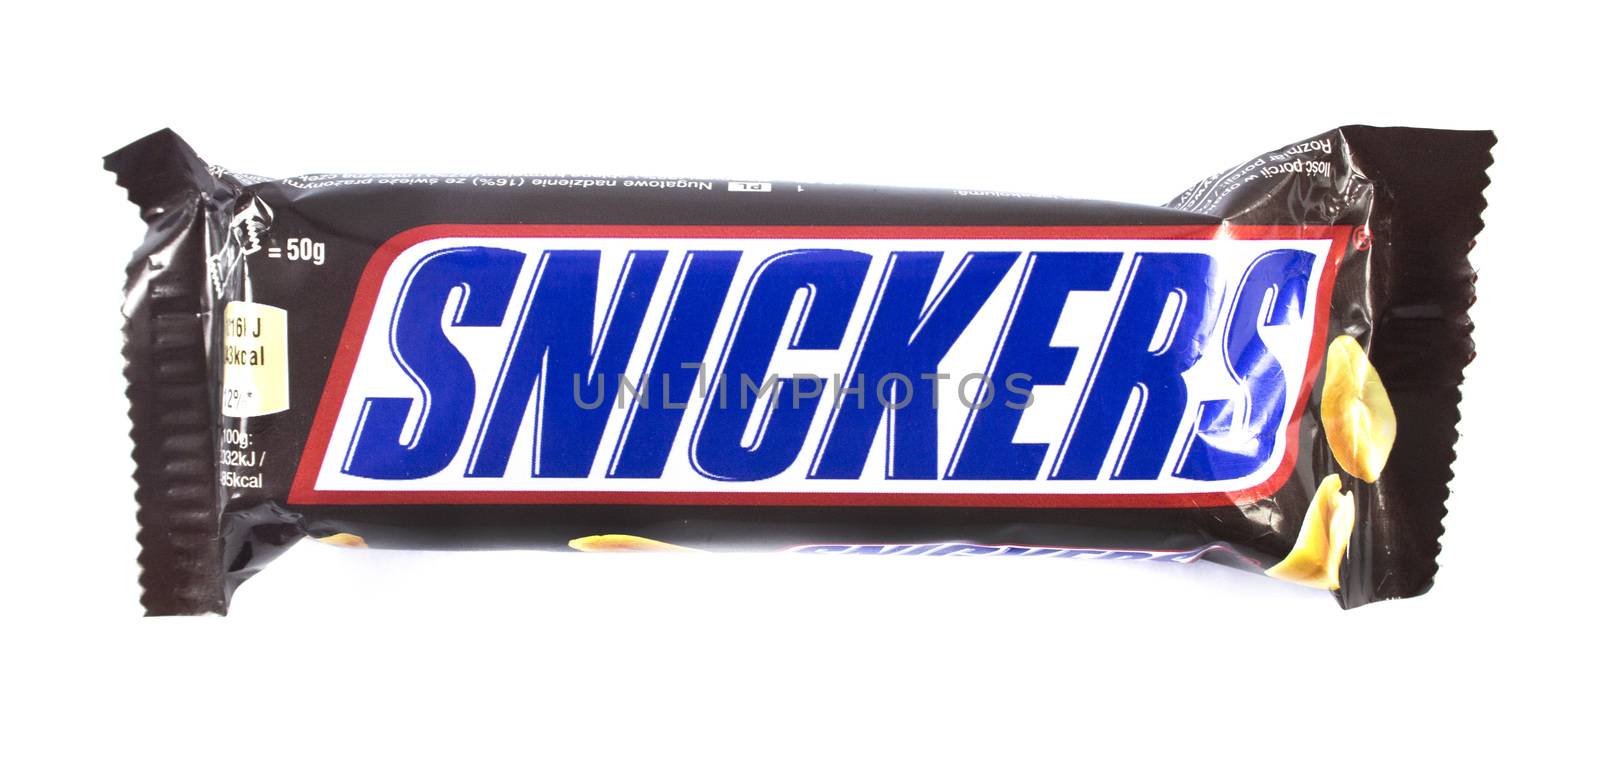 Snickers chocolate bar by designsstock